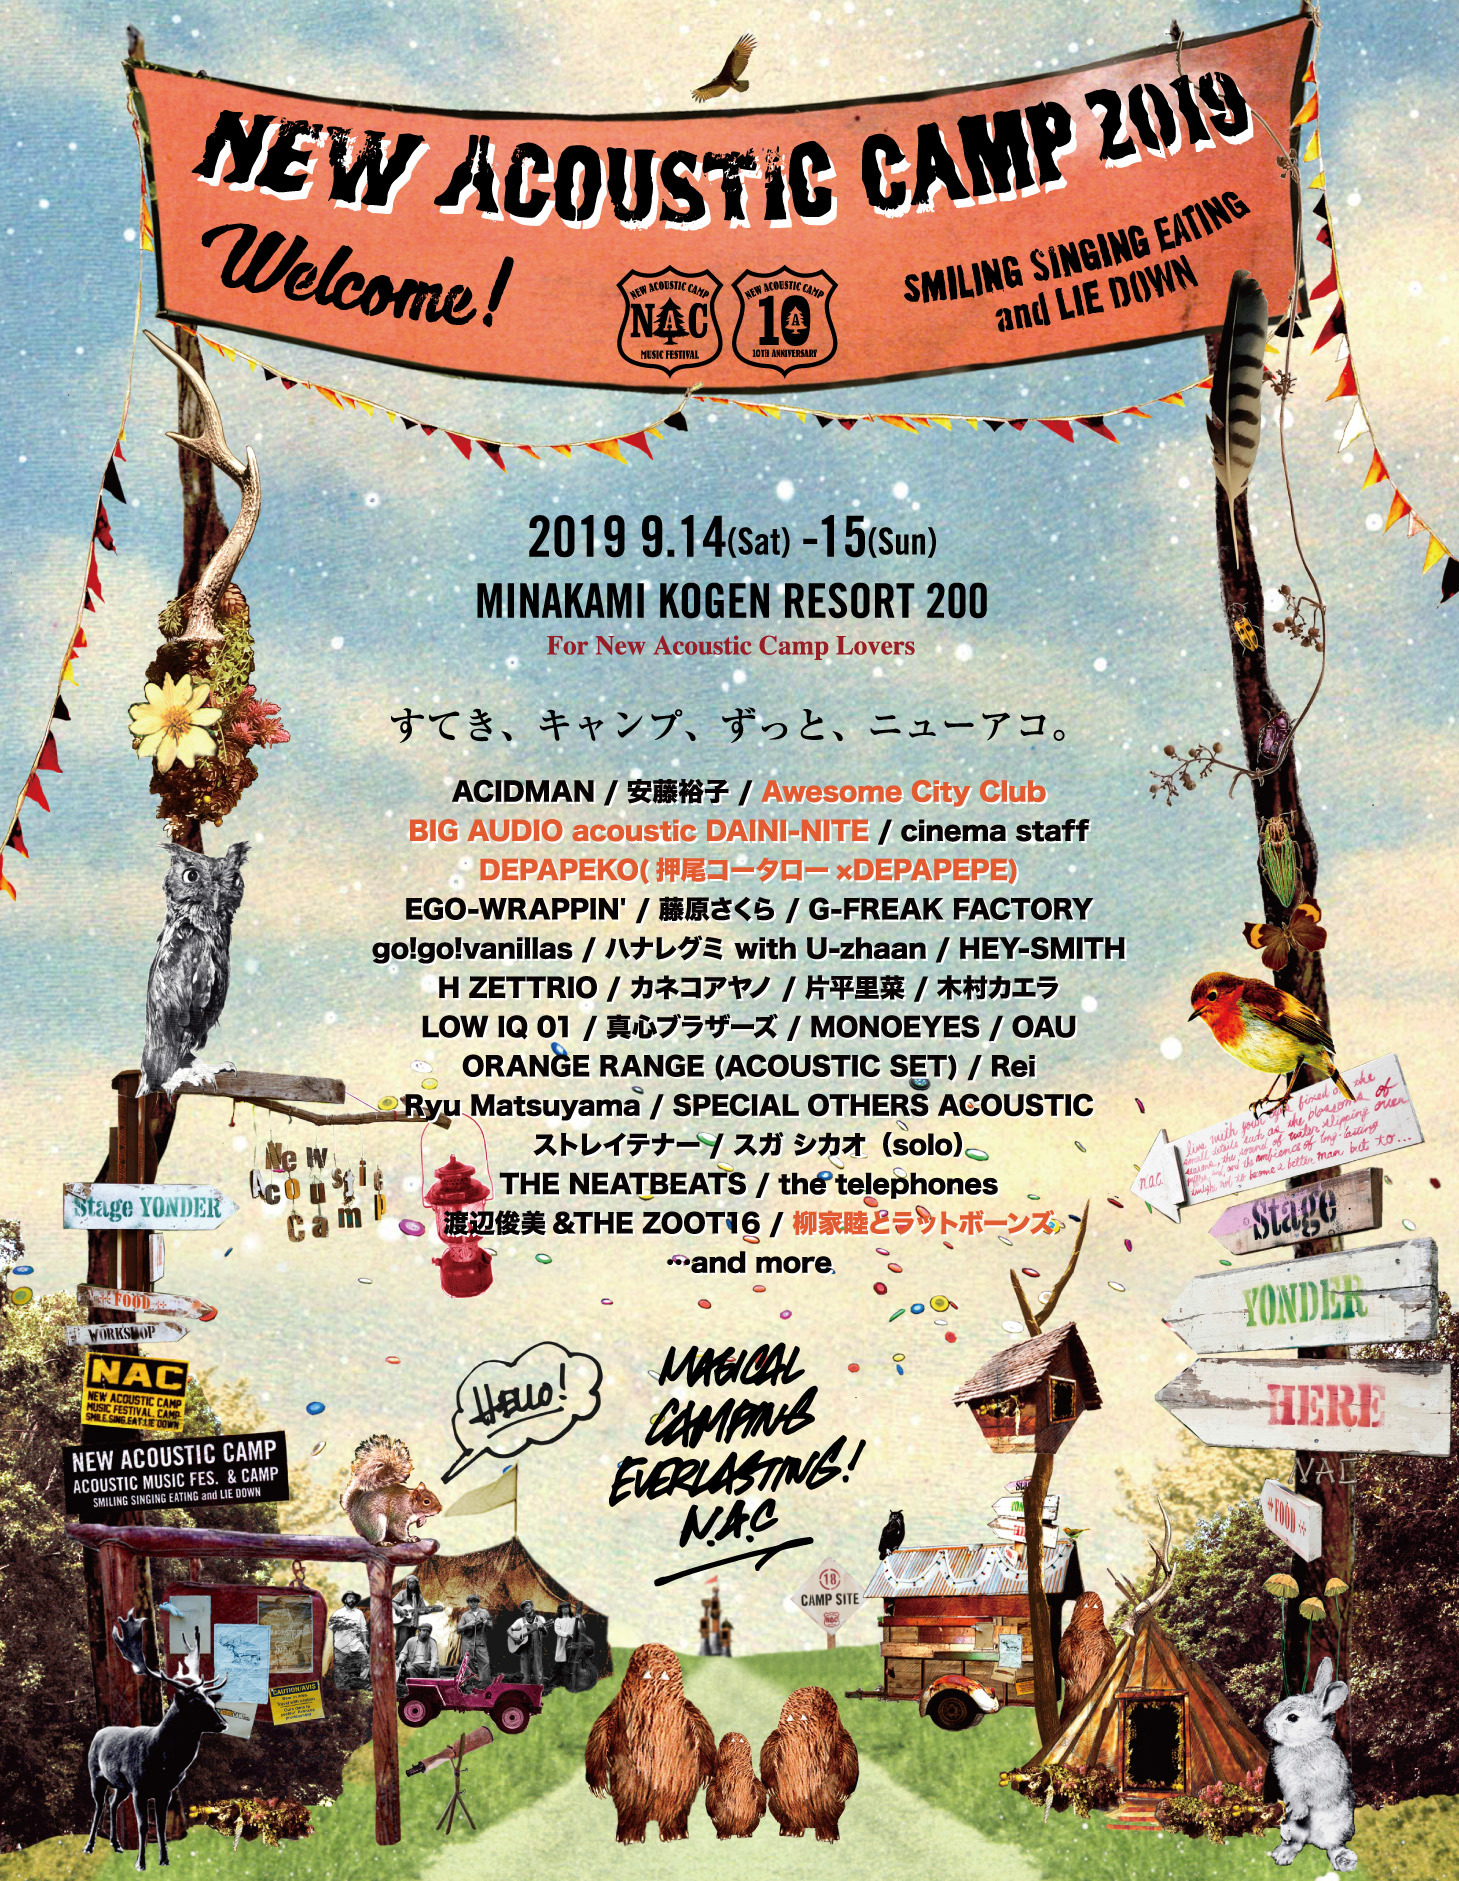 New Acoustic Camp 2019